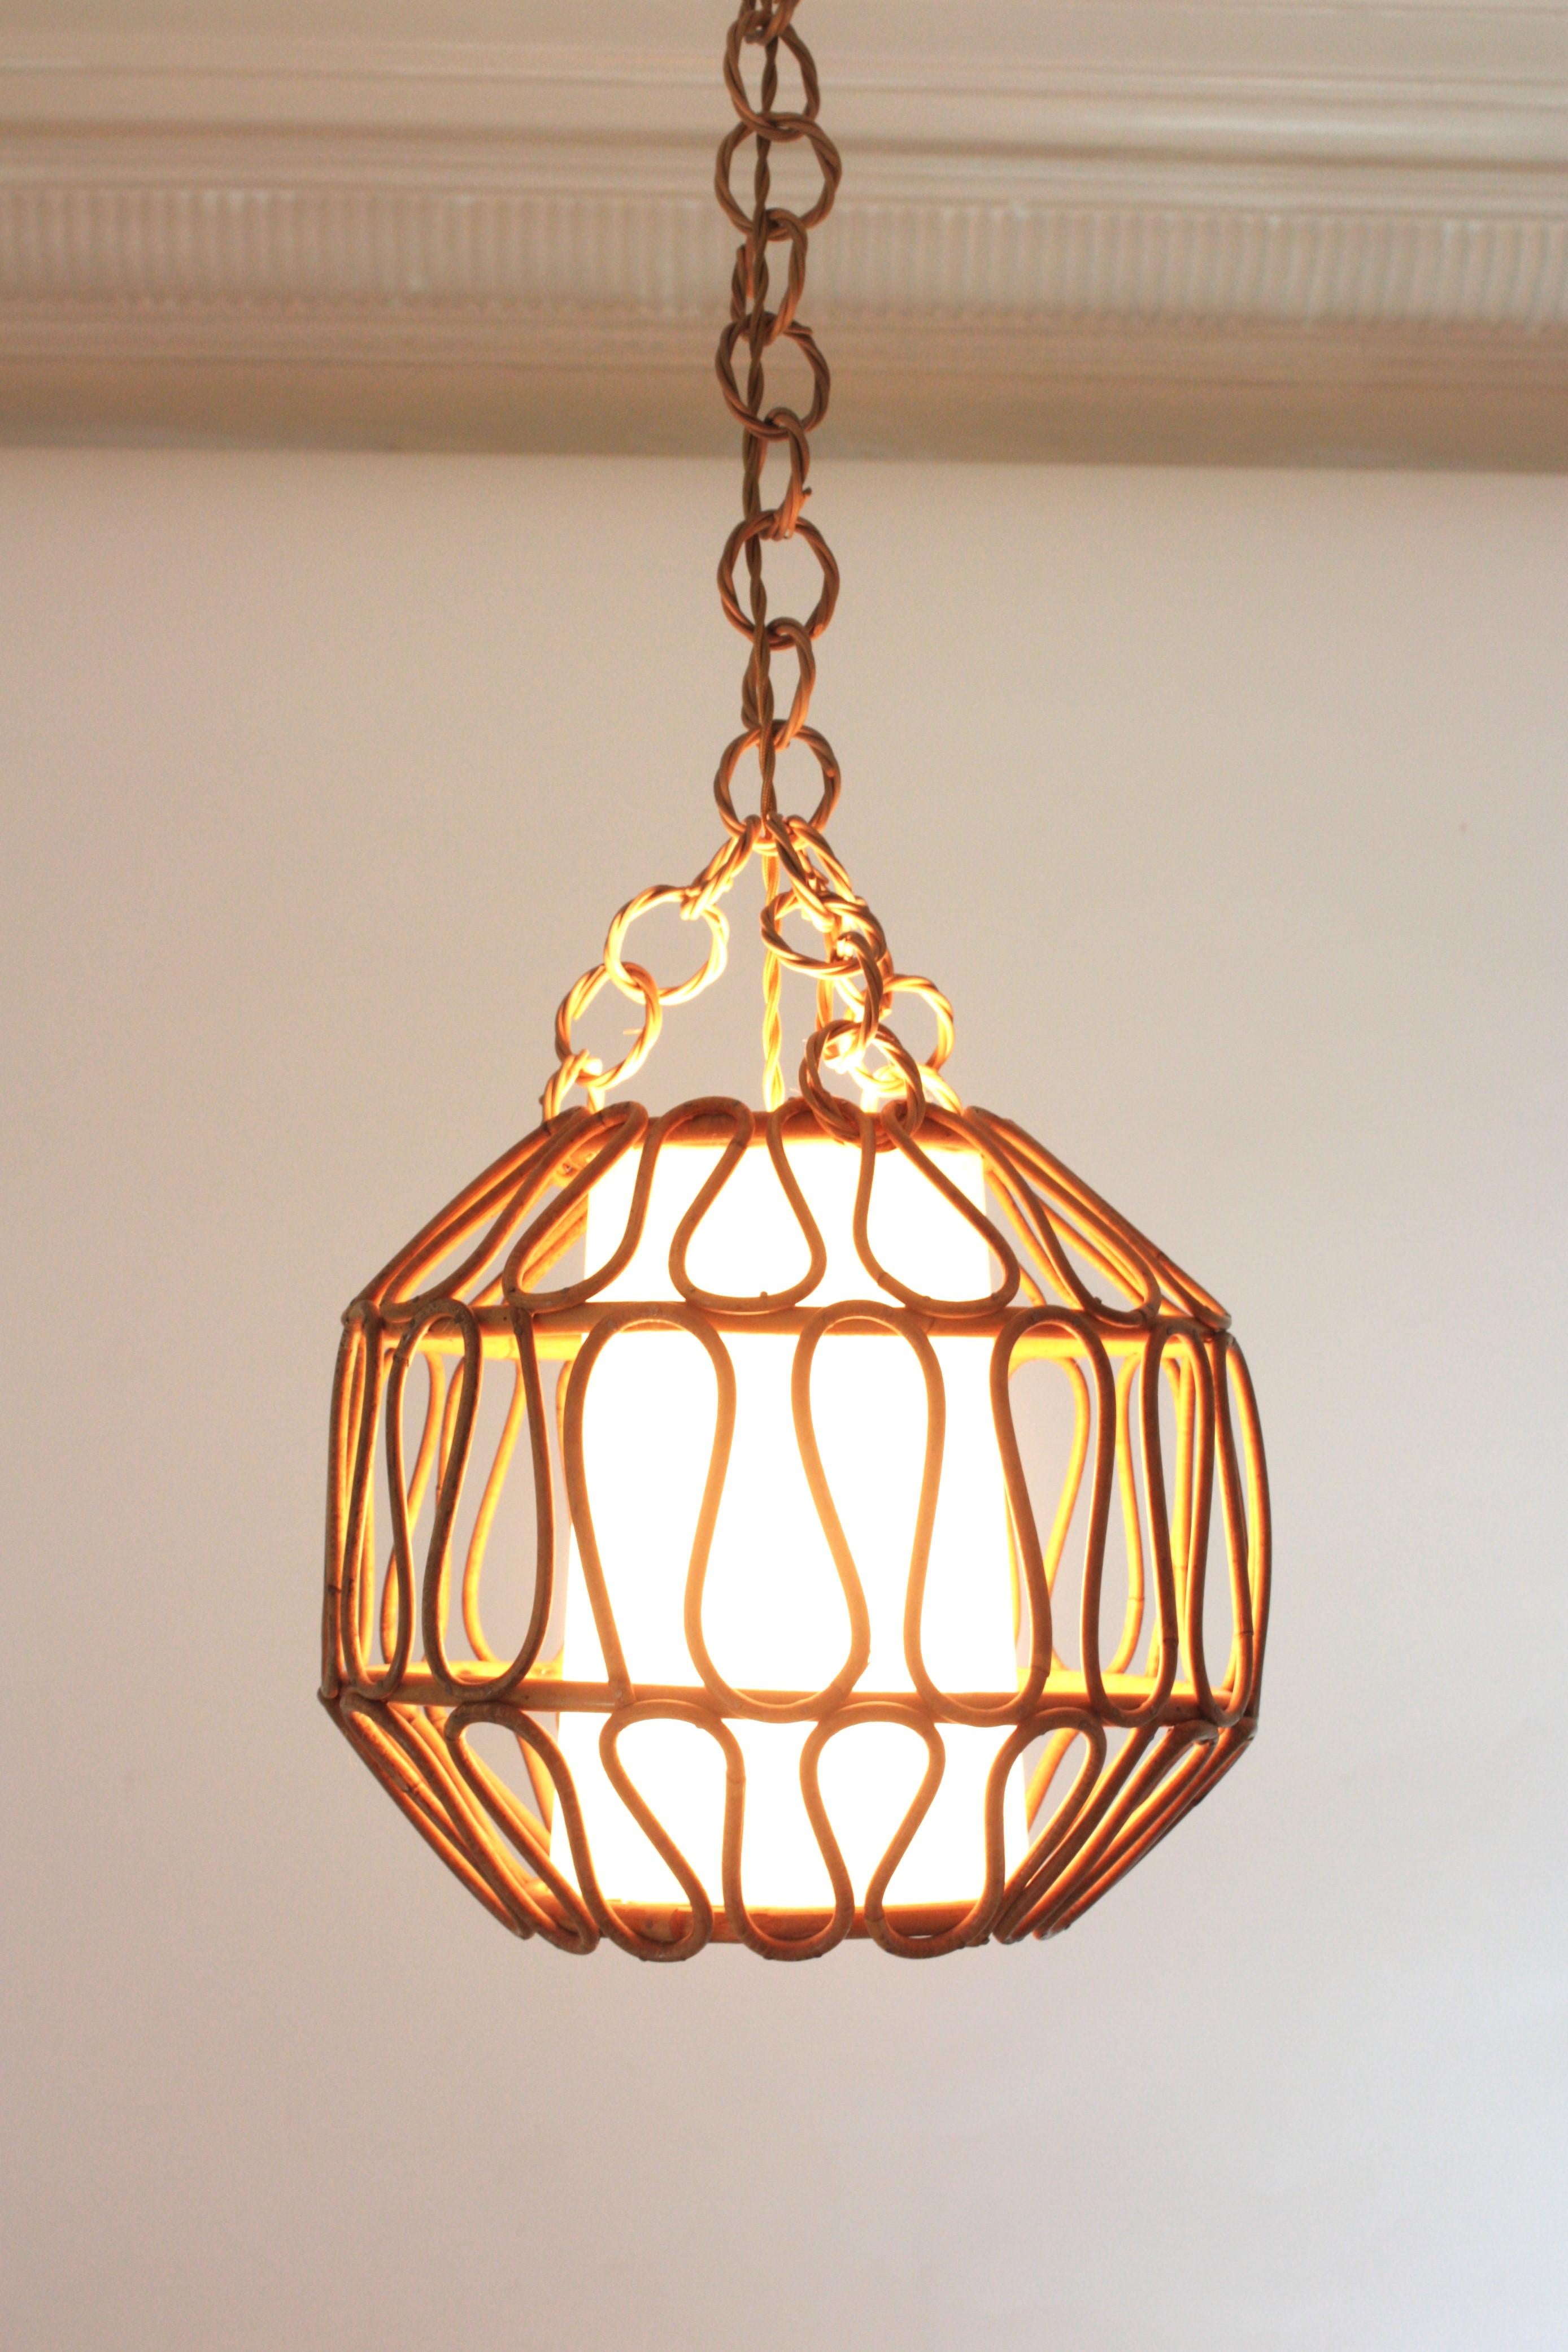 Wicker Rattan Globe Pendant Light or Lantern with Loop Details, Spain, 1960s For Sale